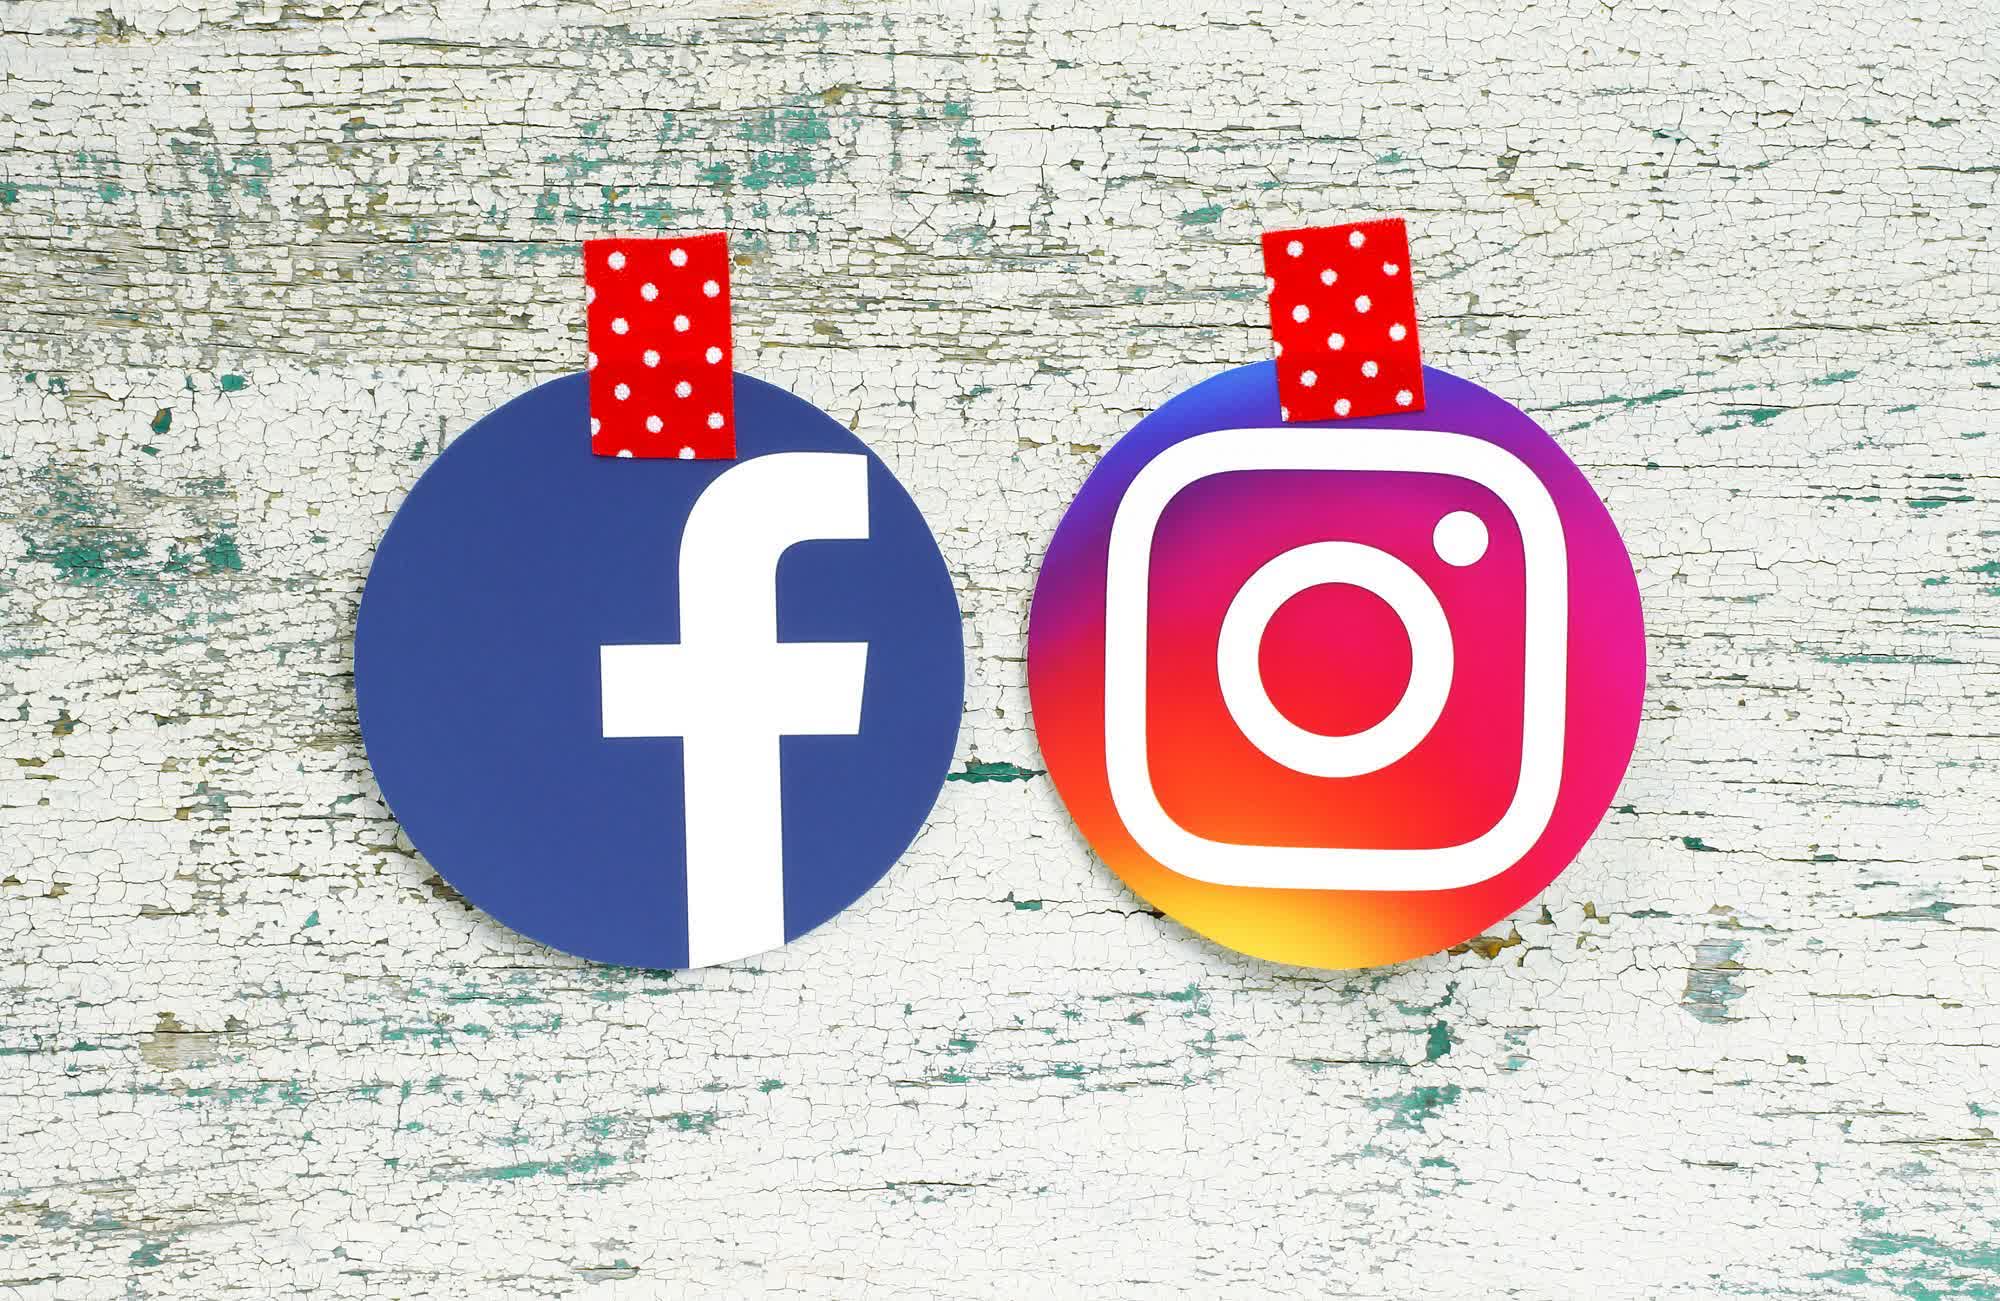 All Instagram users can now hide the like count, Facebook to receive same feature in coming weeks